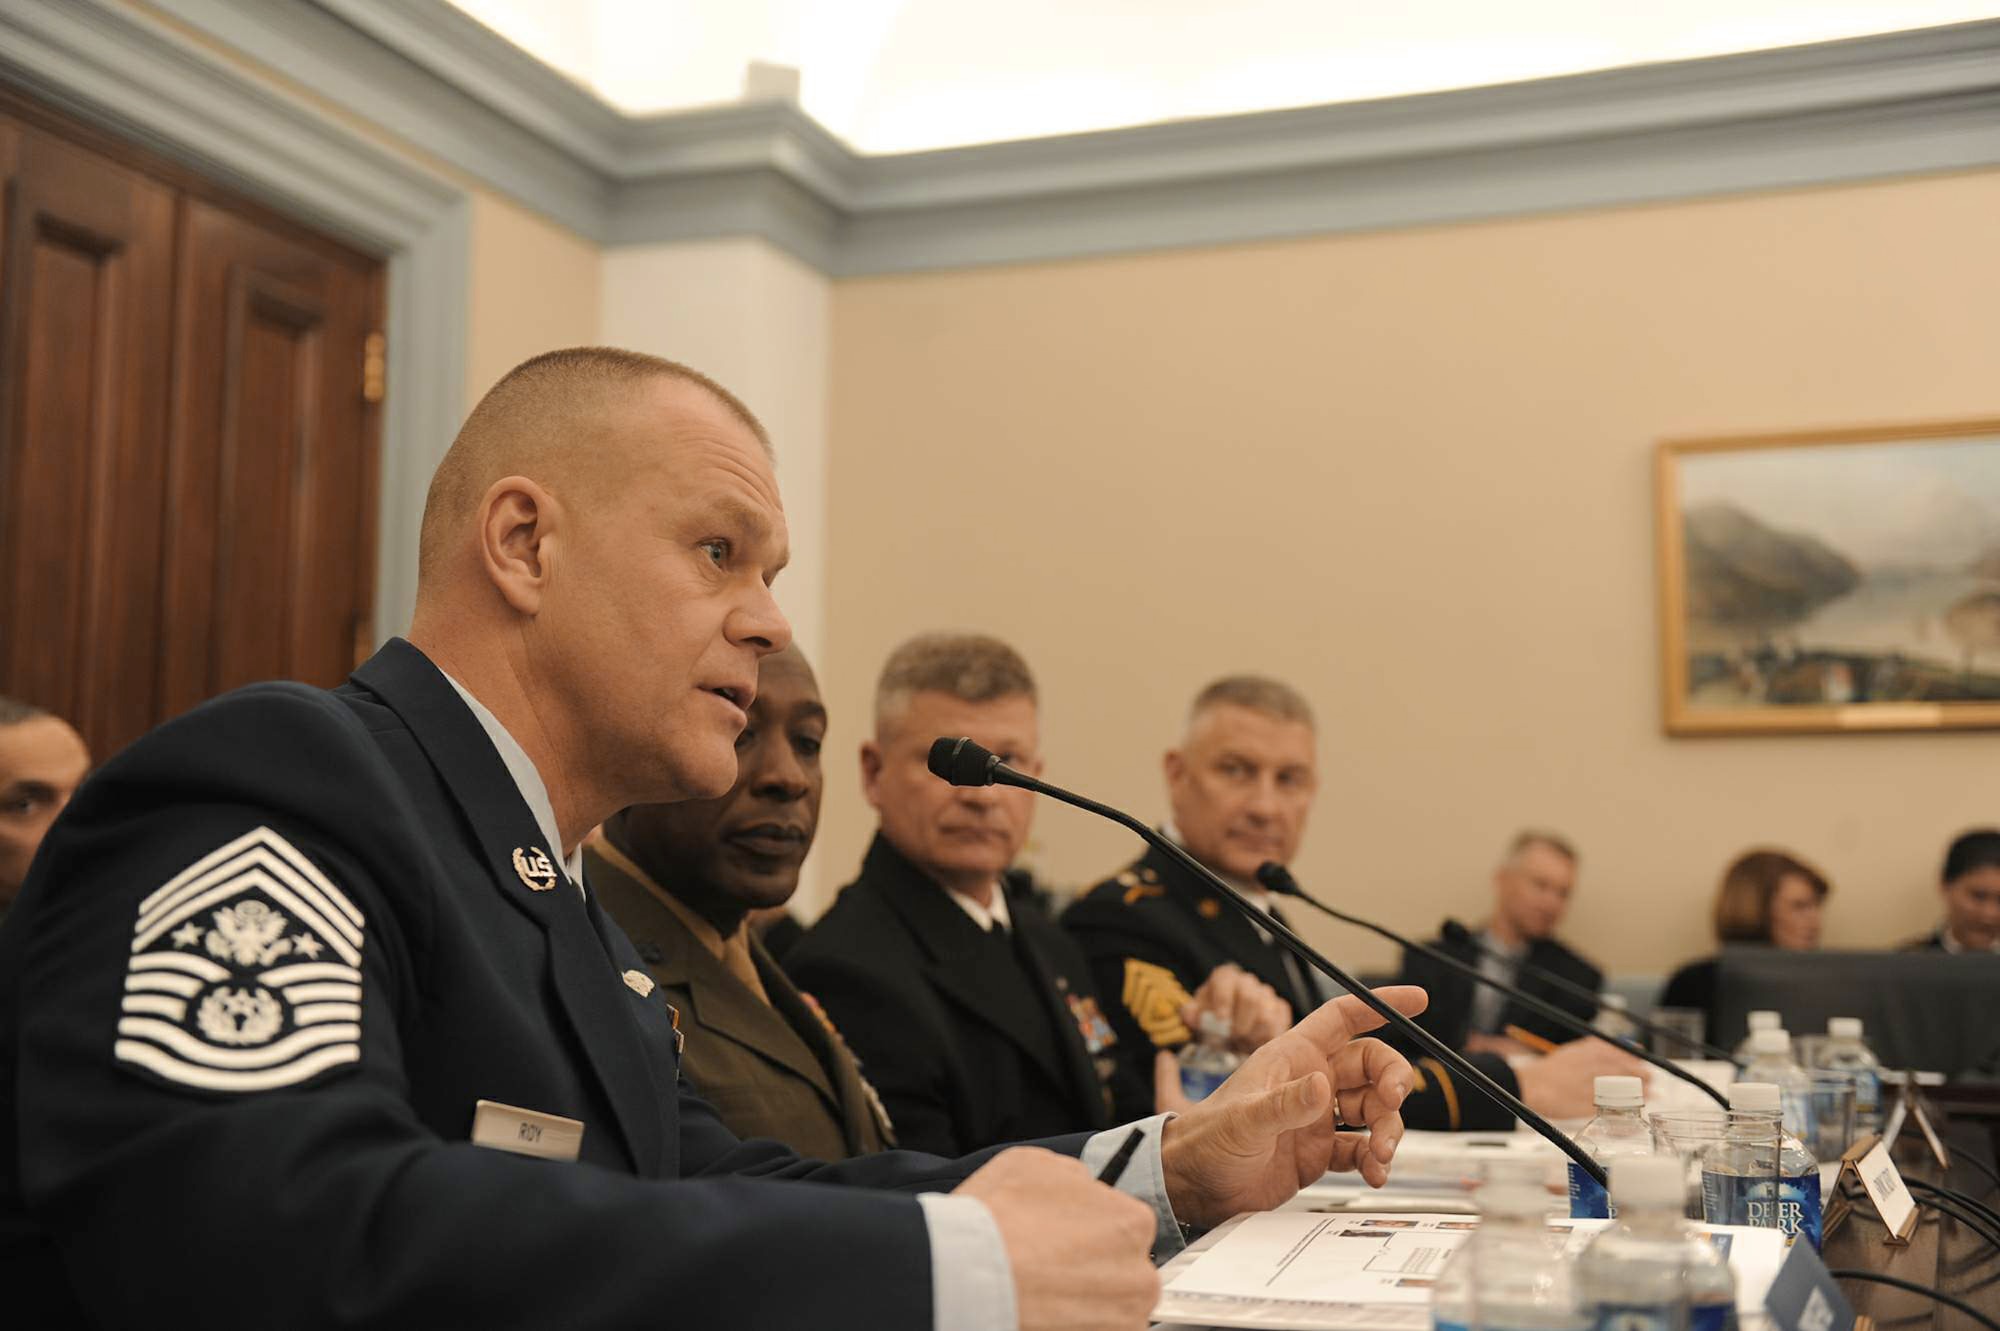 Chief Master Sgt. of the Air Force James A. Roy testifies before the House Subcommittee for Military Construction, Veterans Affairs and Related Agencies in Washington, D.C., March 30, 2011. The committee focused on quality-of-life issues for enlisted members serving in the military. Roy shared the witness stand with his counterparts from the Marines, Navy and Army, who are Sergeant Major of the Marine Corps Carlton Kent, Master Chief Petty Officer of the Navy Rick West, and Sergeant Major of the Army Raymond Chandler. (U.S. Air Force photo/Scott M. Ash)